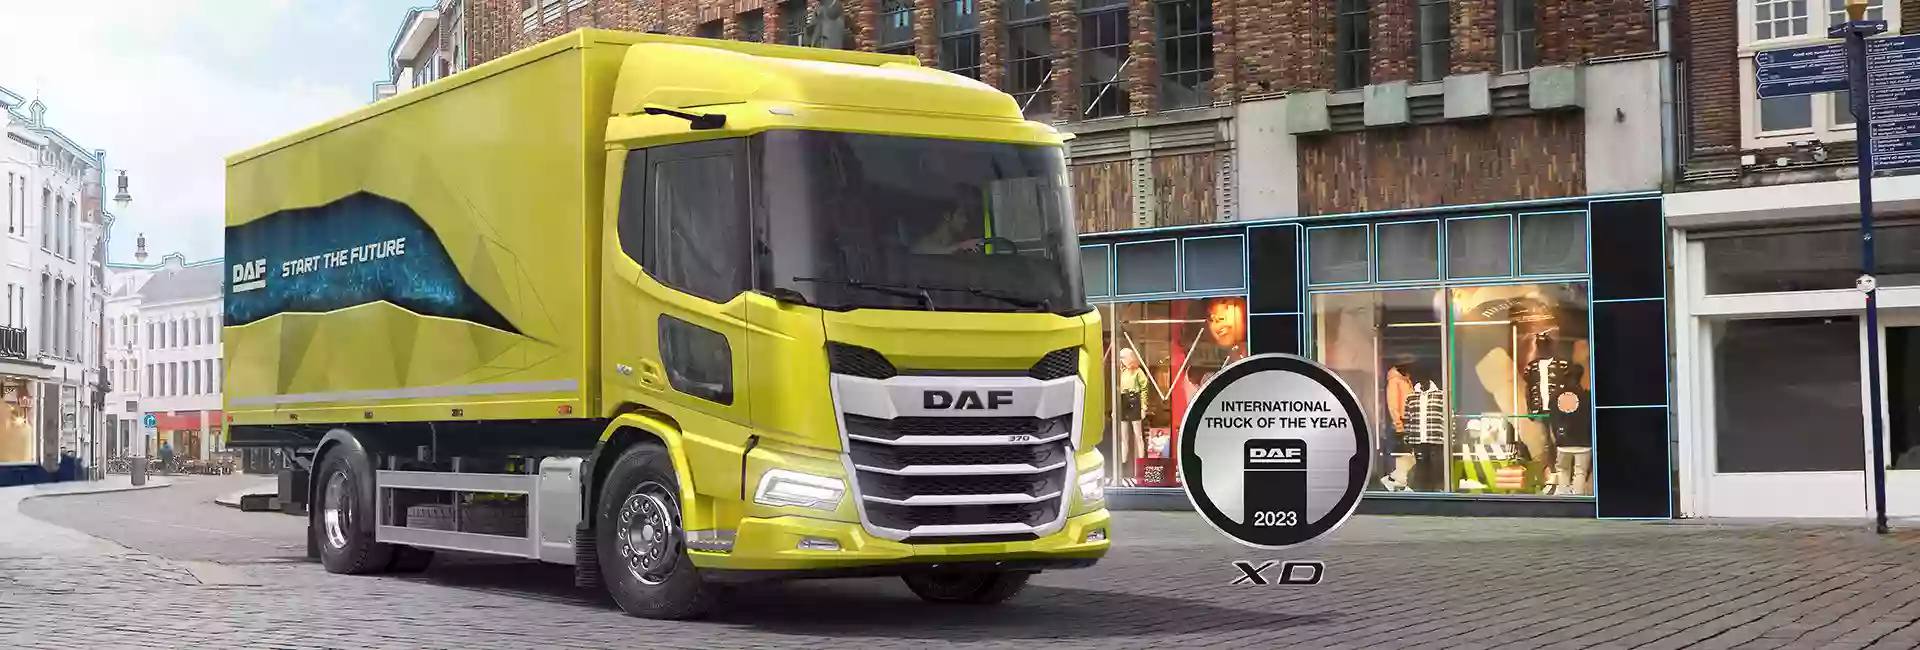 DAF - Poids Lourds Synergies Thouars